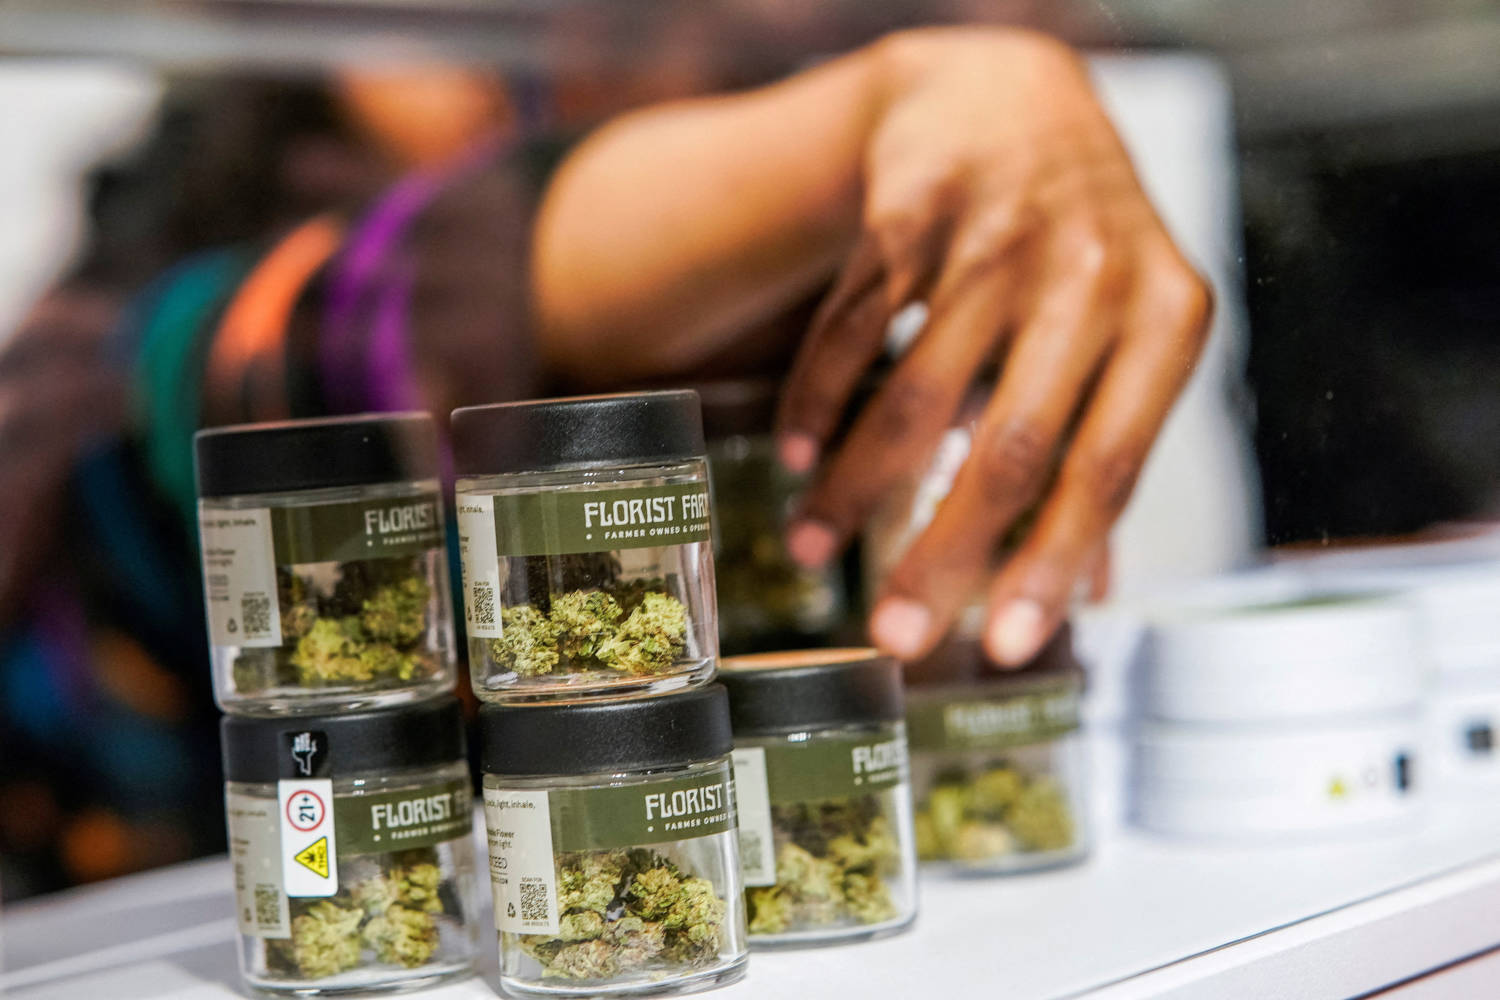 File Photo: First Legal Recreational Cannabis Shop Opens In New York